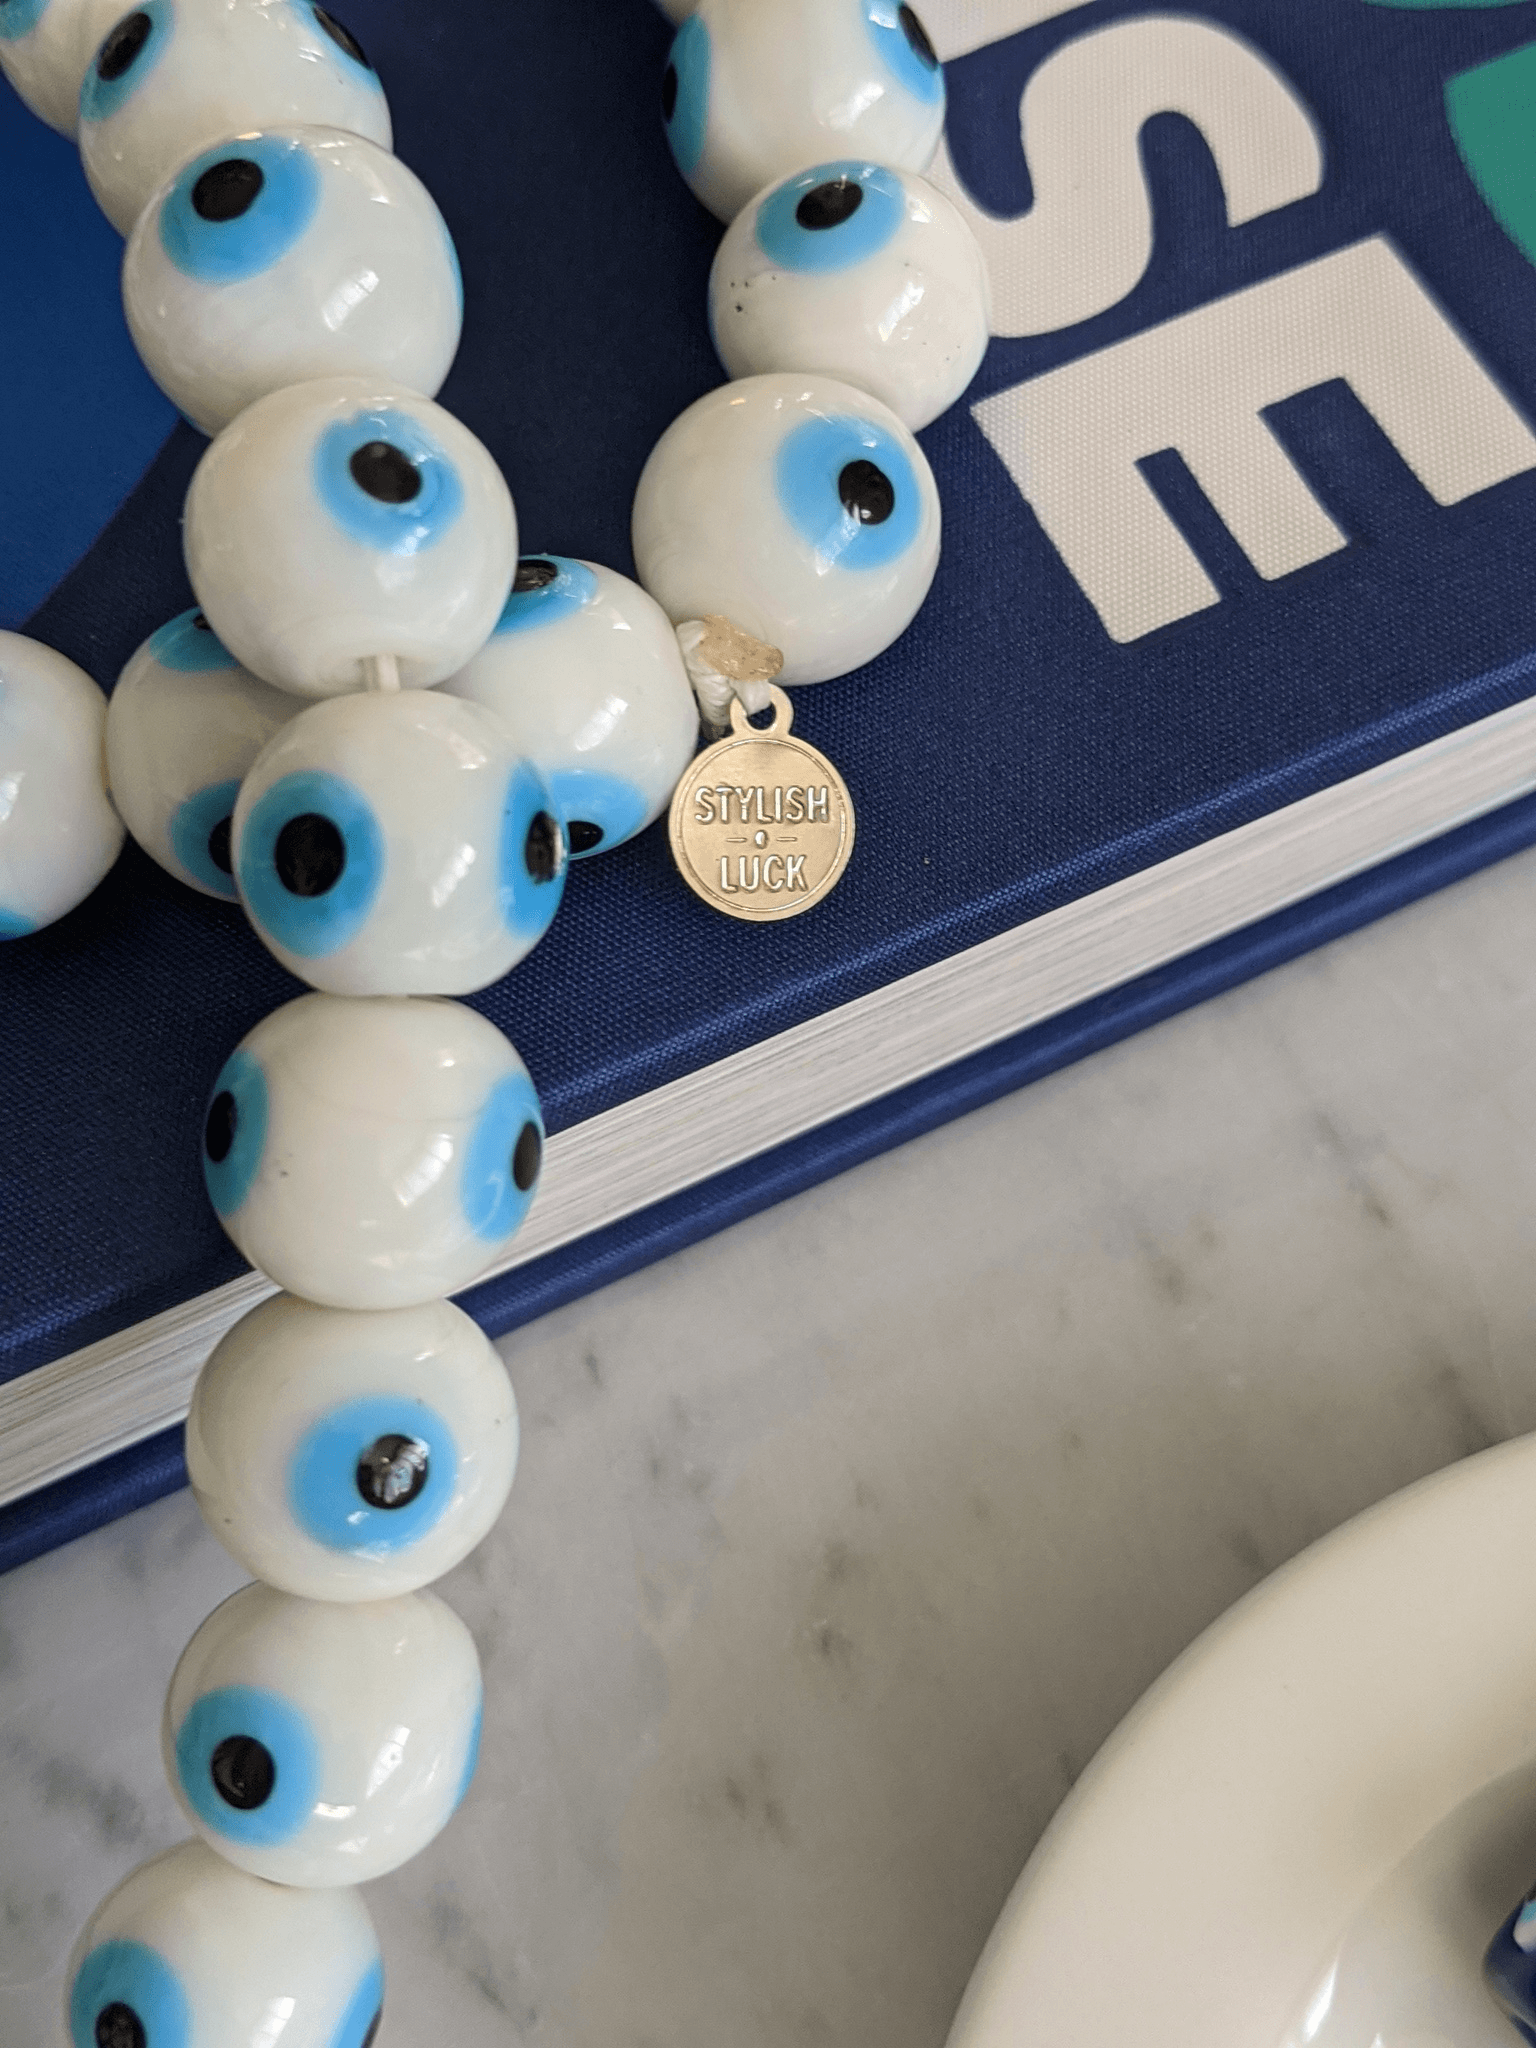 Evil eye glass beads home decor necklace with white silk tassel - White - stylish luck home decor